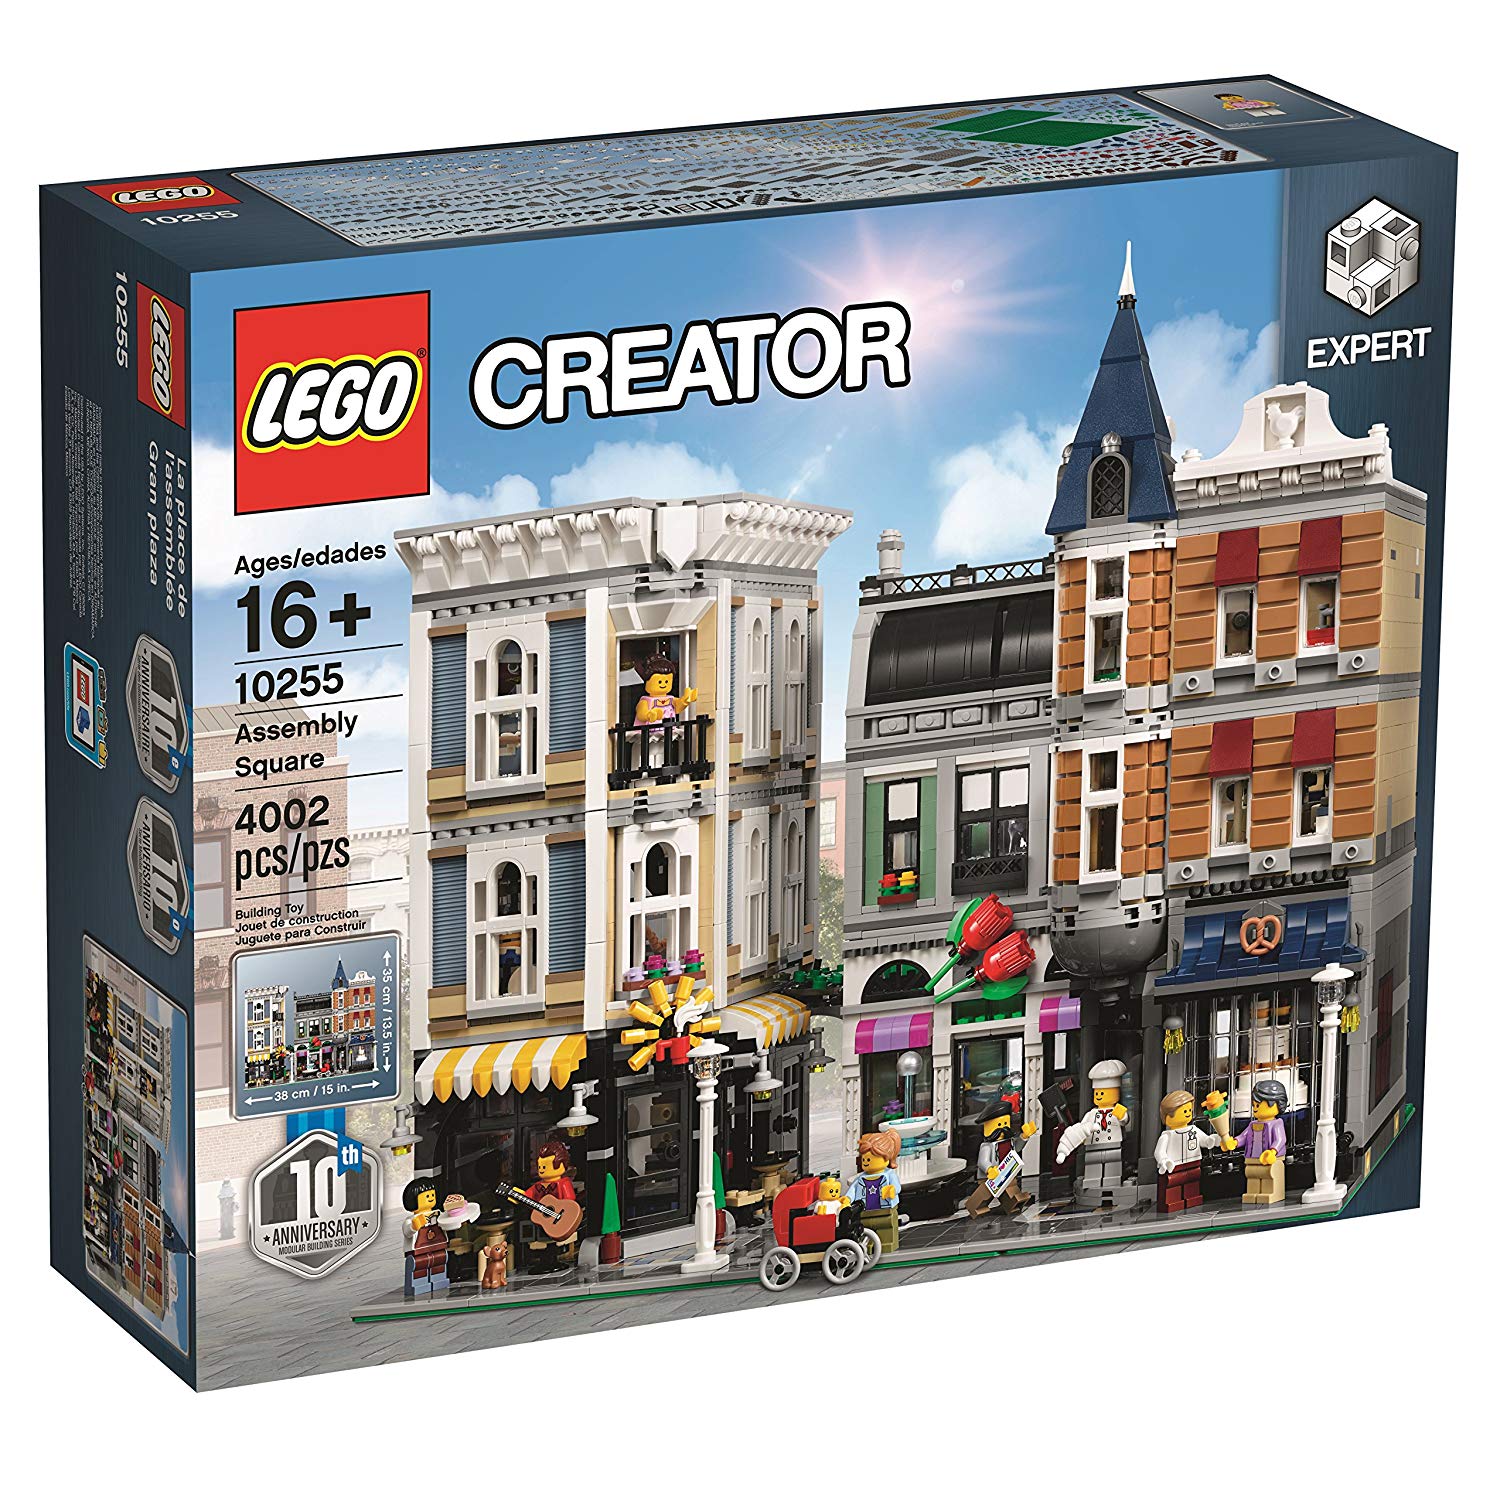 Lego Creator Assembly Square Toy